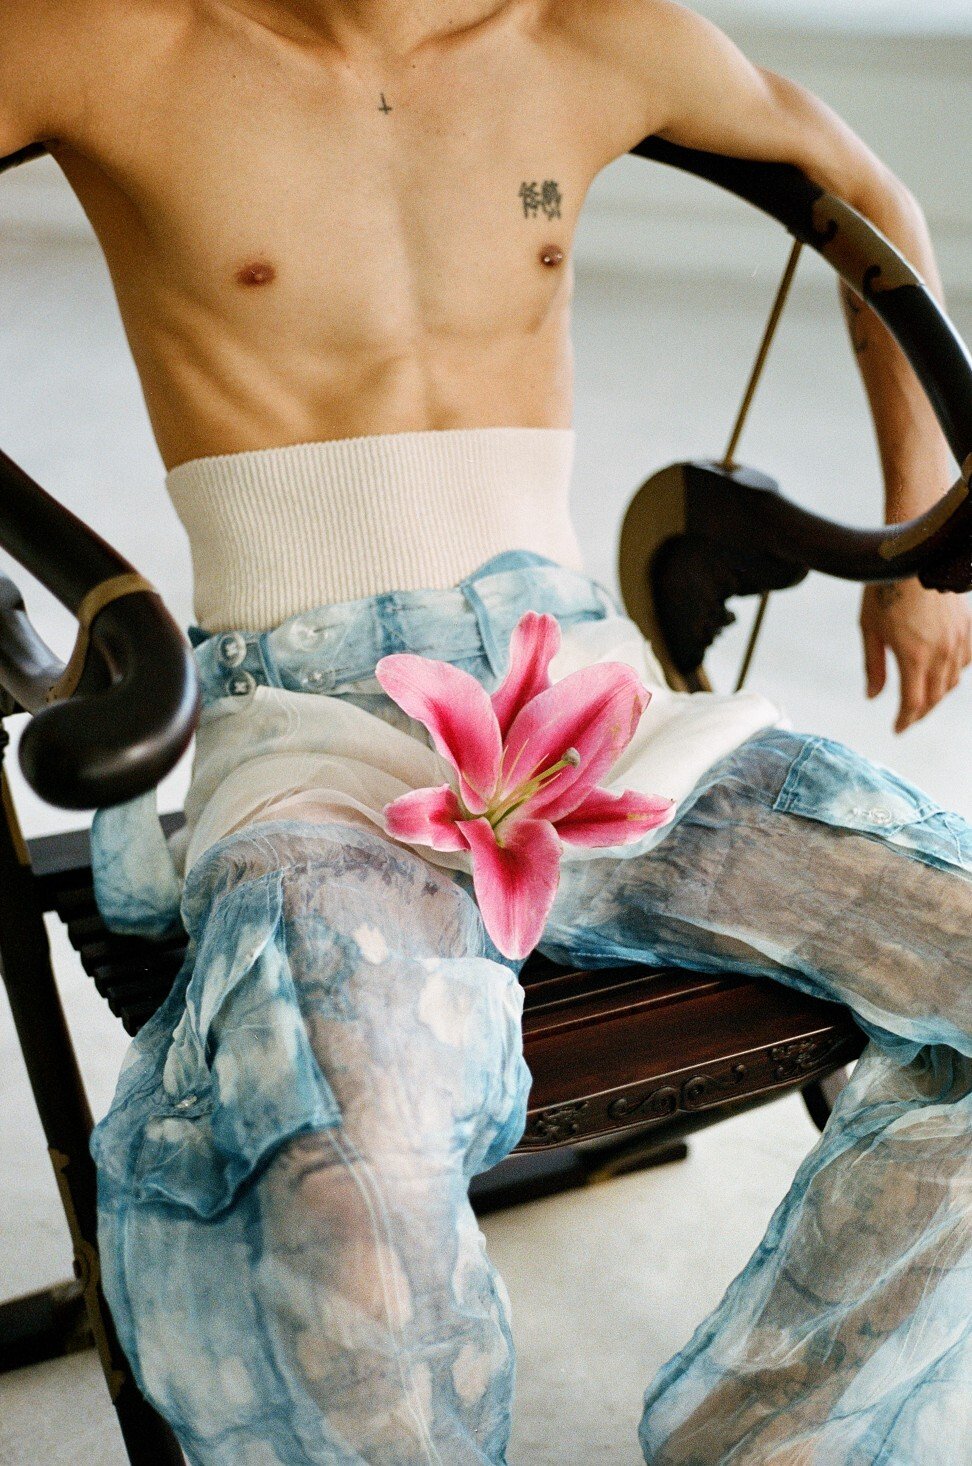 Gender-fluid fashion is now starting to blossom among Asian designers. Photo: Ponder.er